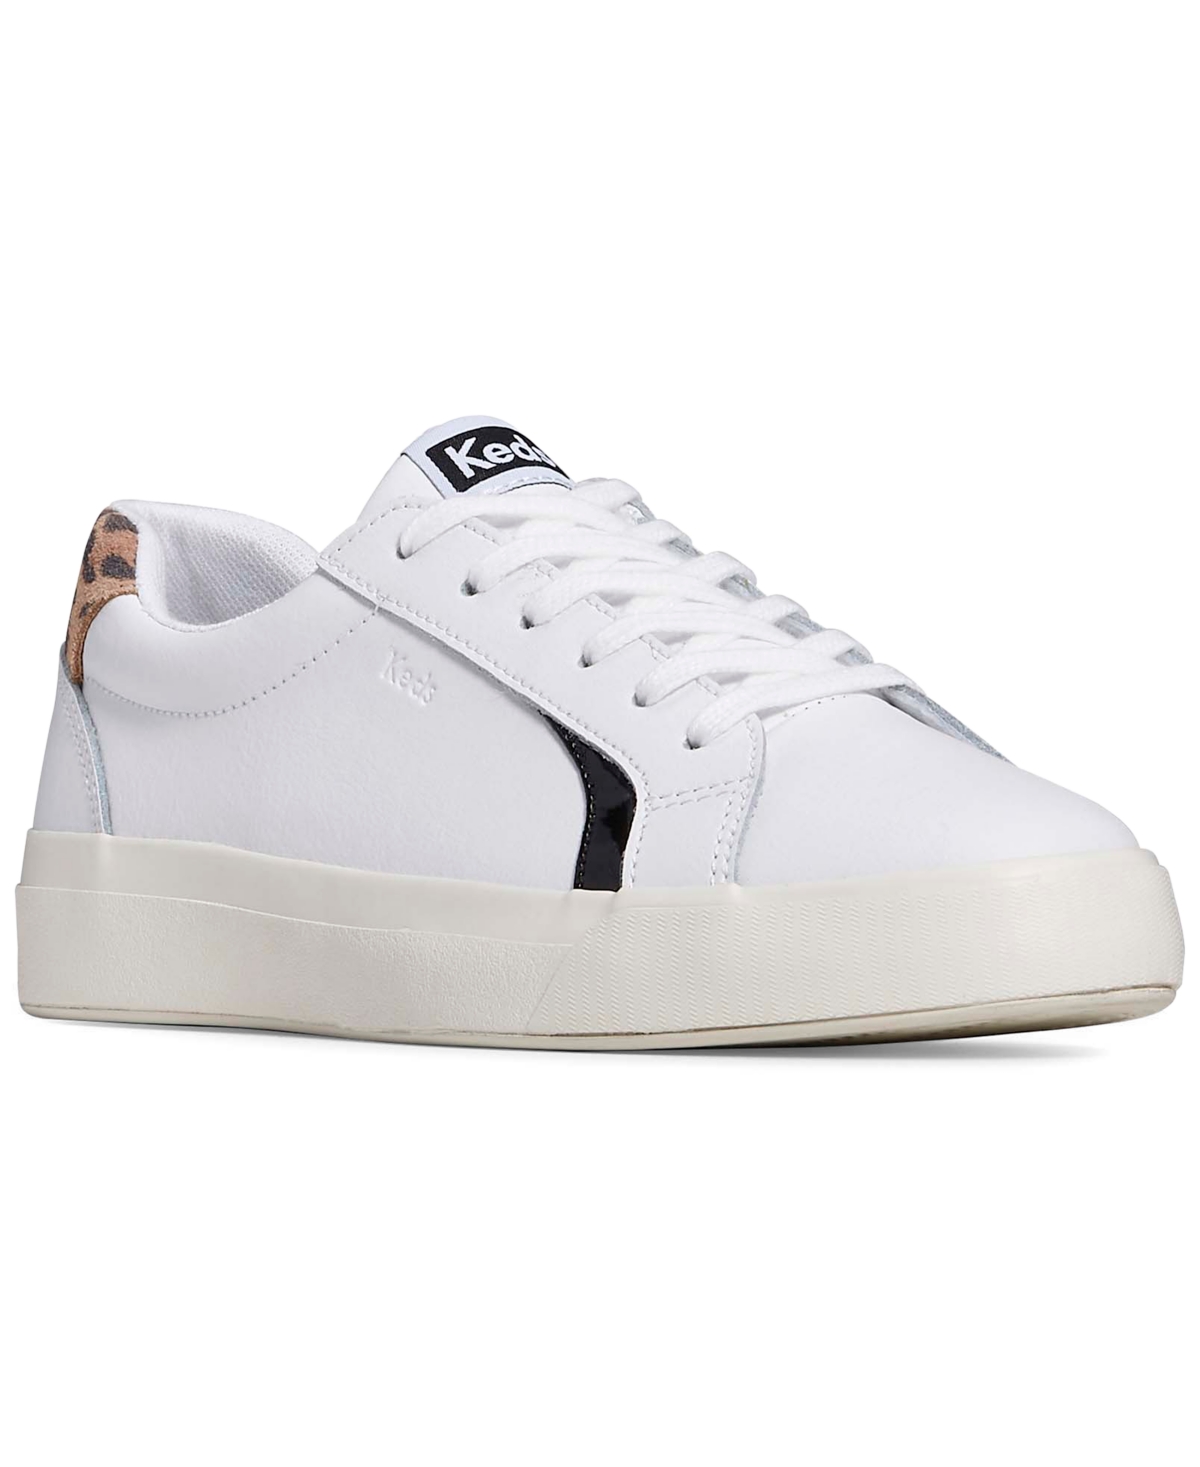 Women's Pursuit Leather Lace-Up Casual Sneakers from Finish Line - White